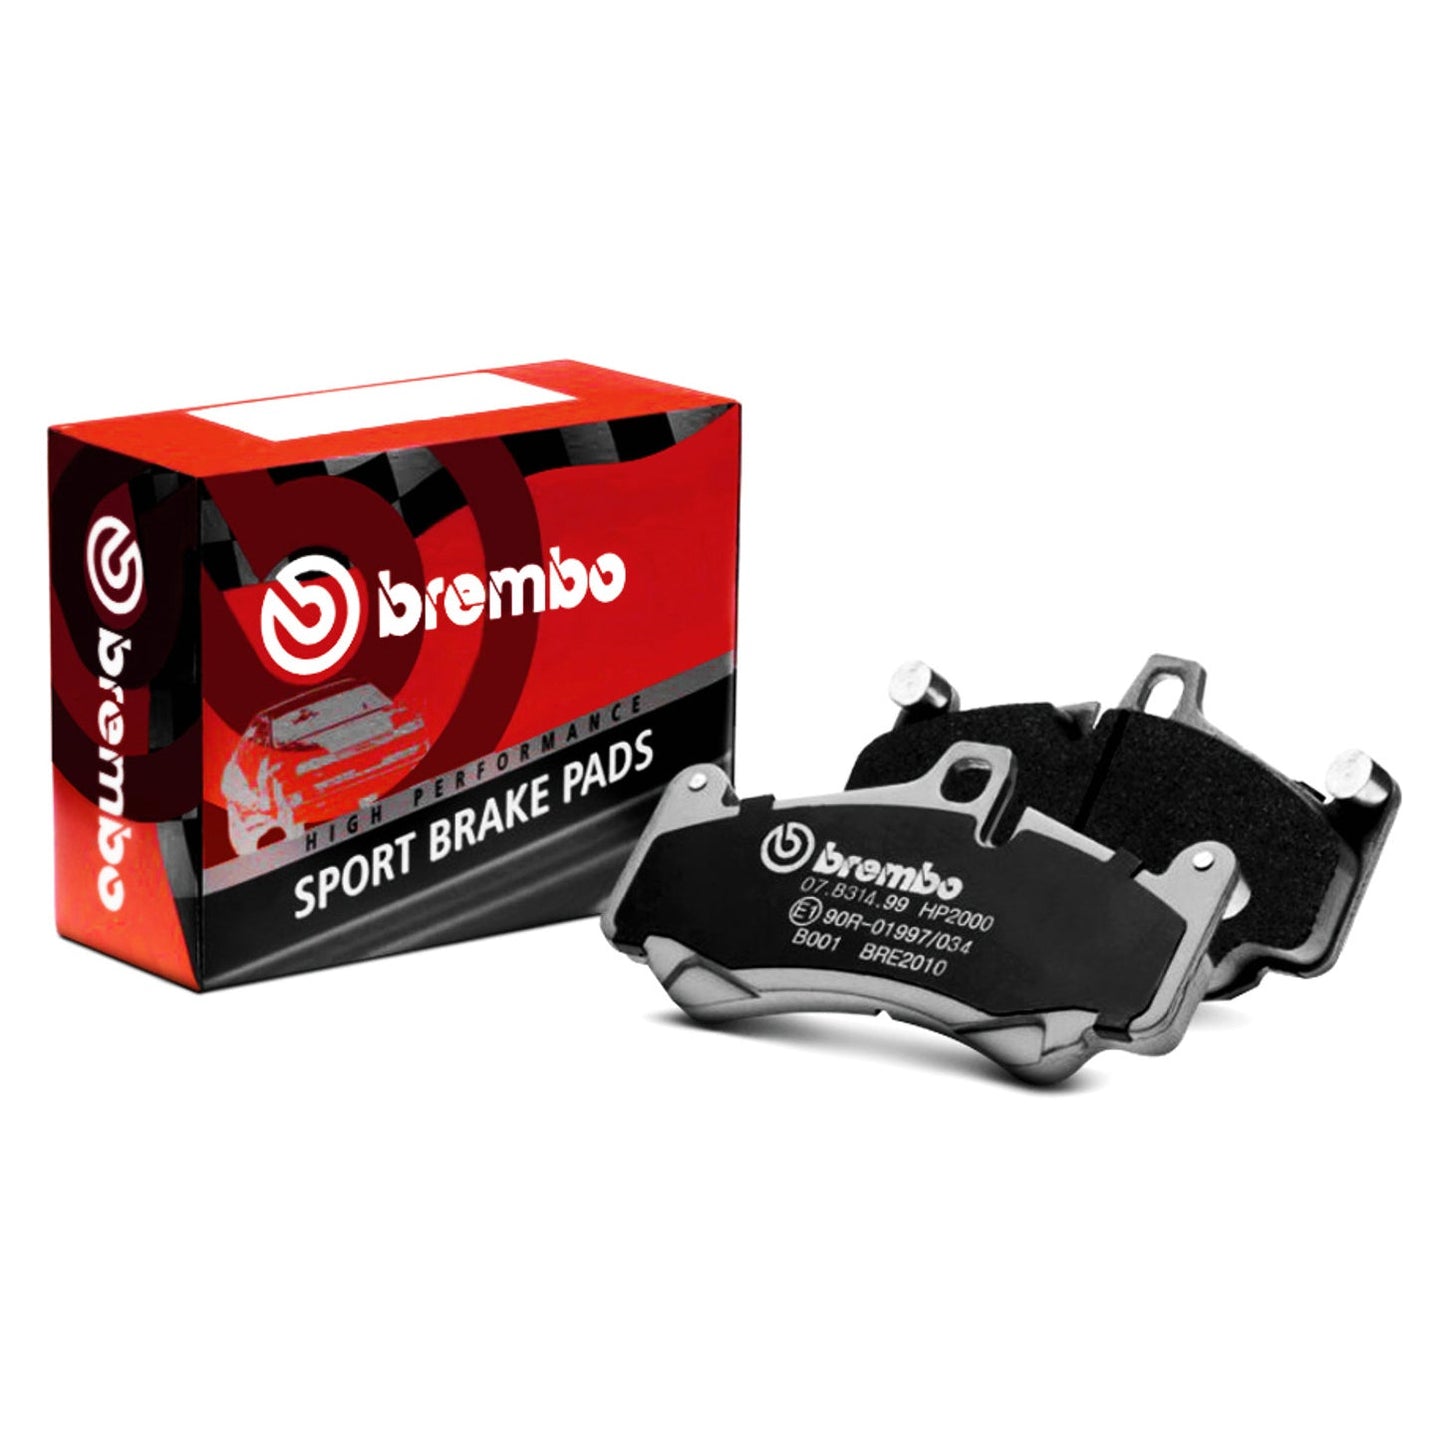 Brembo Sport HP2000 Front Brake Pads for Vauxhall Insignia A Sports Tourer 2.8 V6 Turbo OPC 4x4 325bhp (08-17)